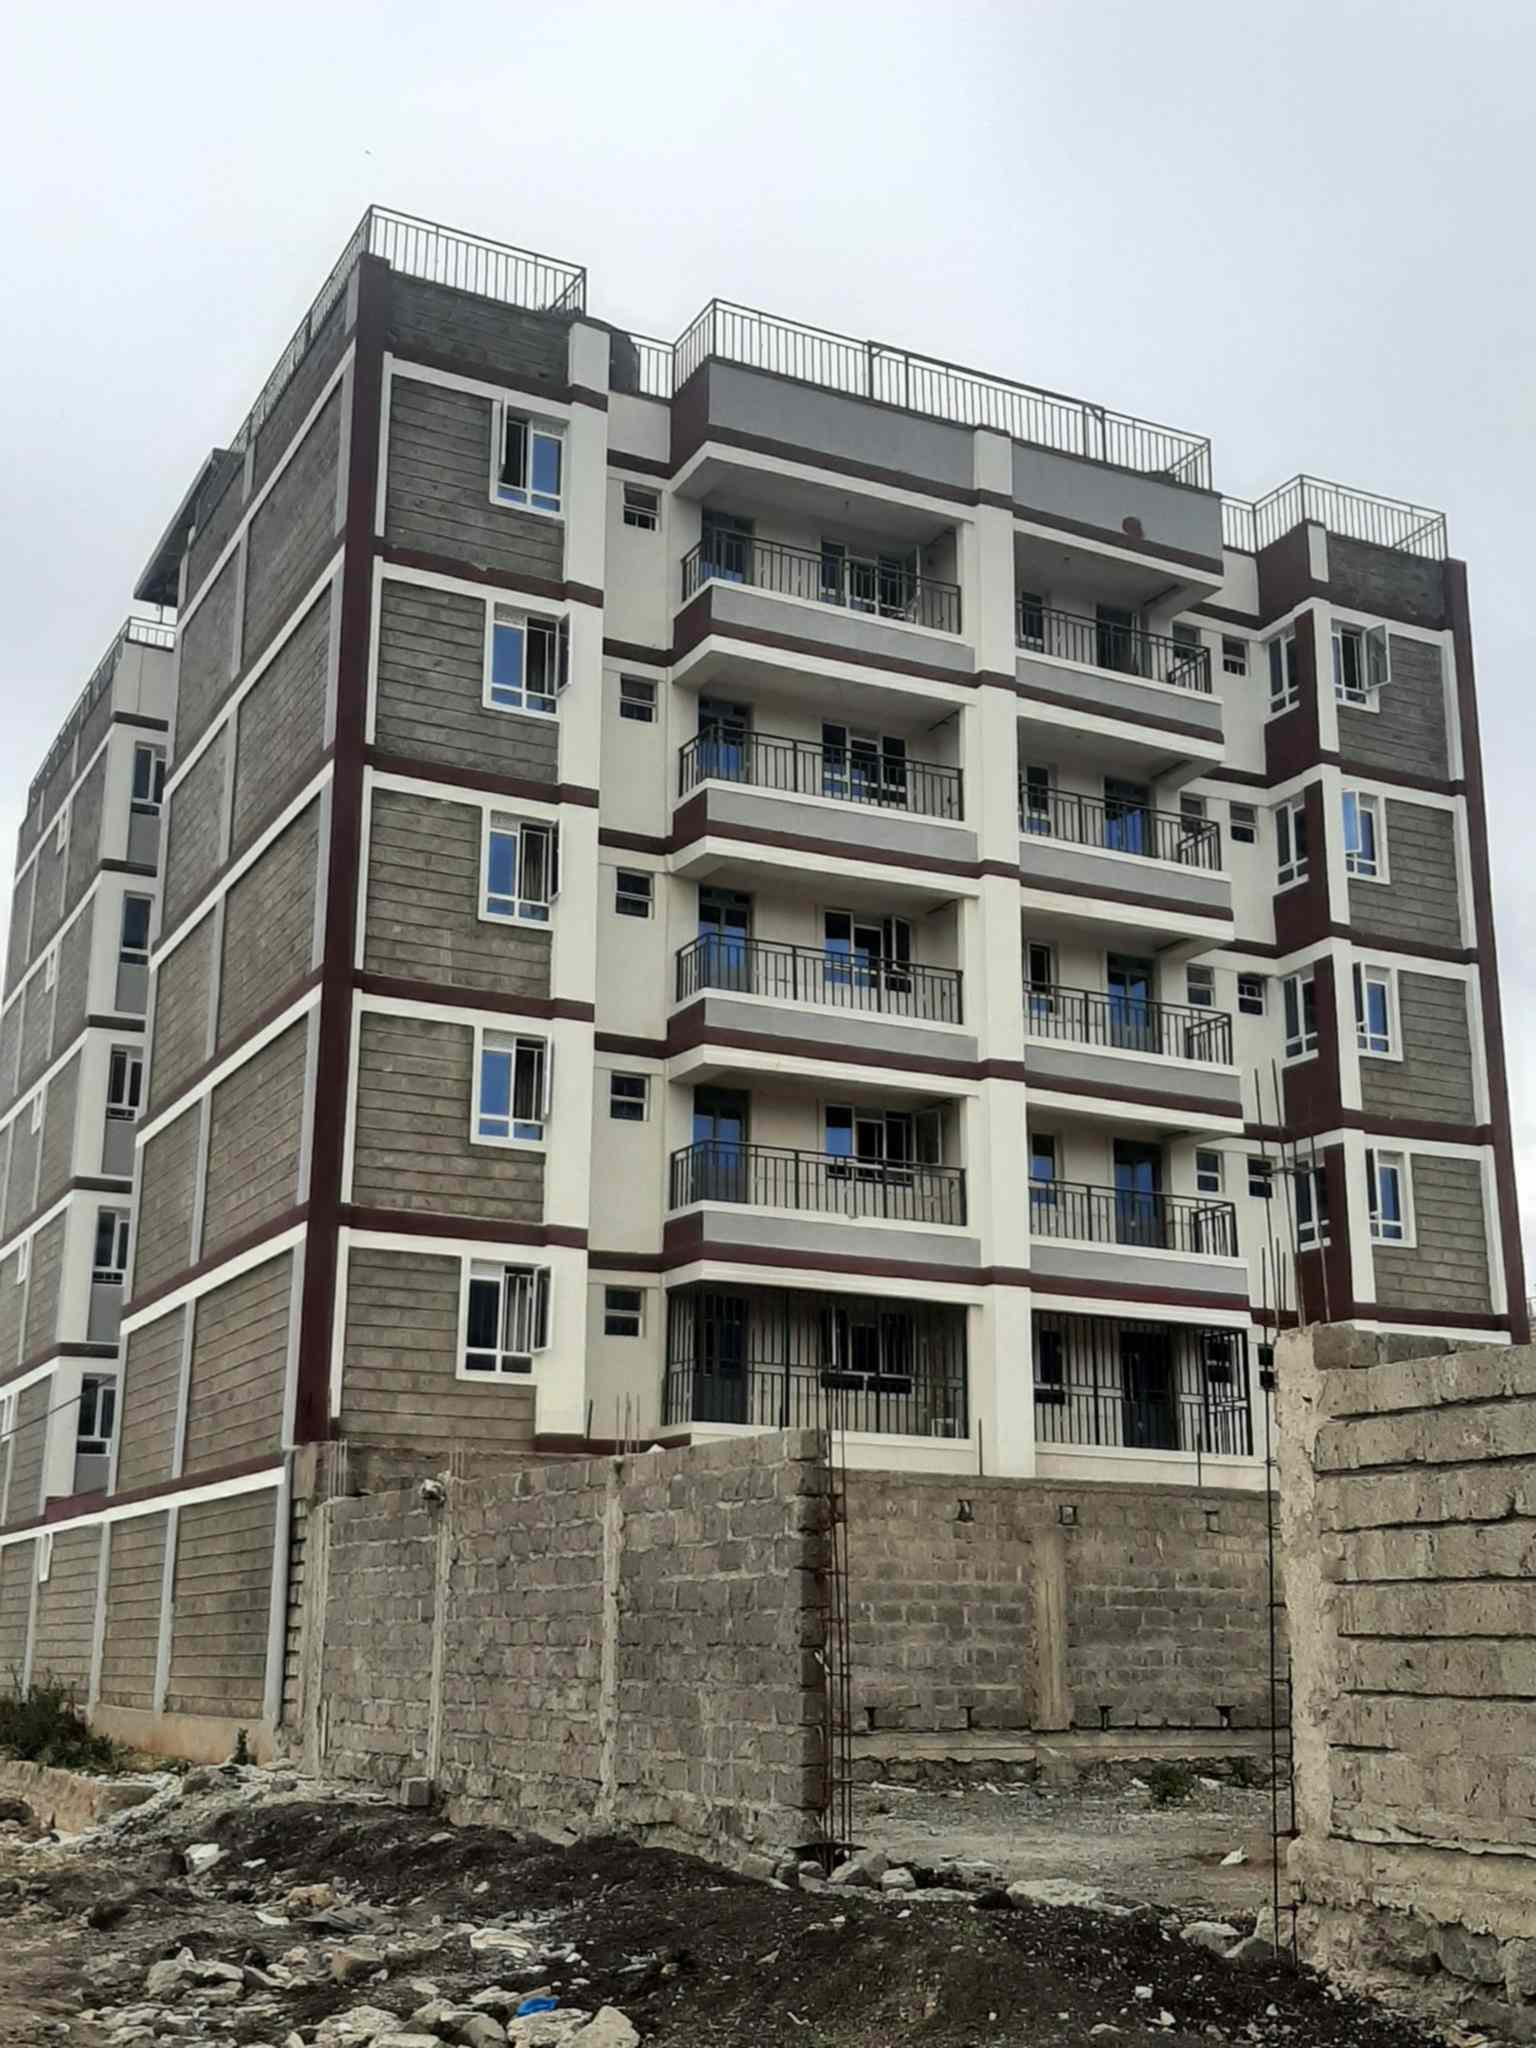 2 and 3 bedroom apartment for rent in Utawala